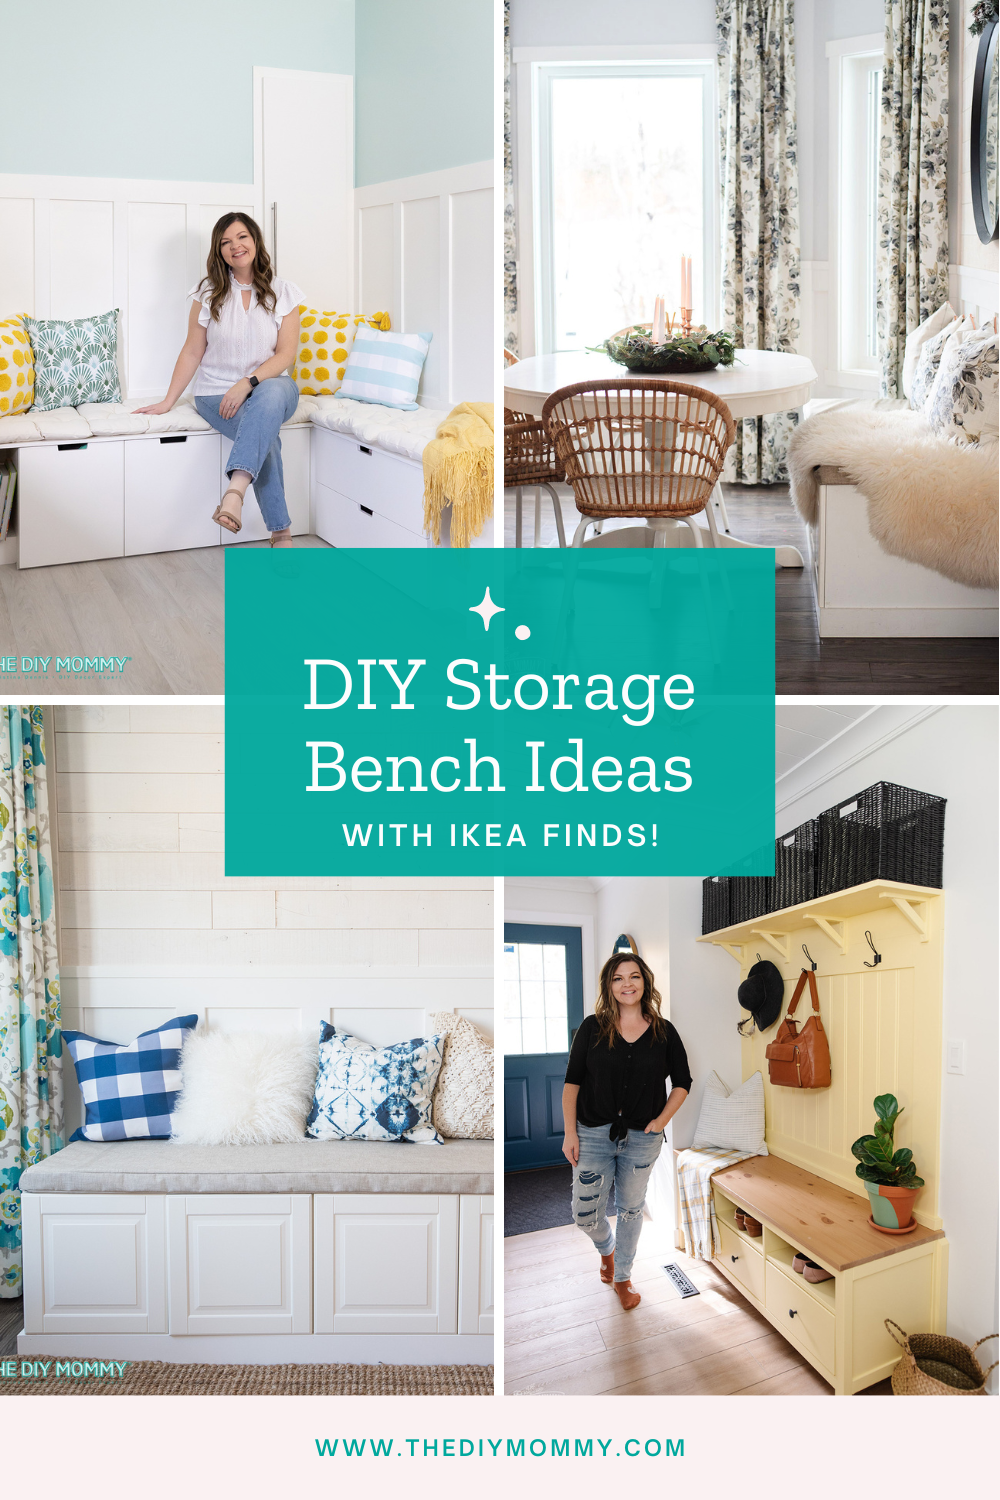 3 Ways to Make a DIY Storage Bench with IKEA Finds